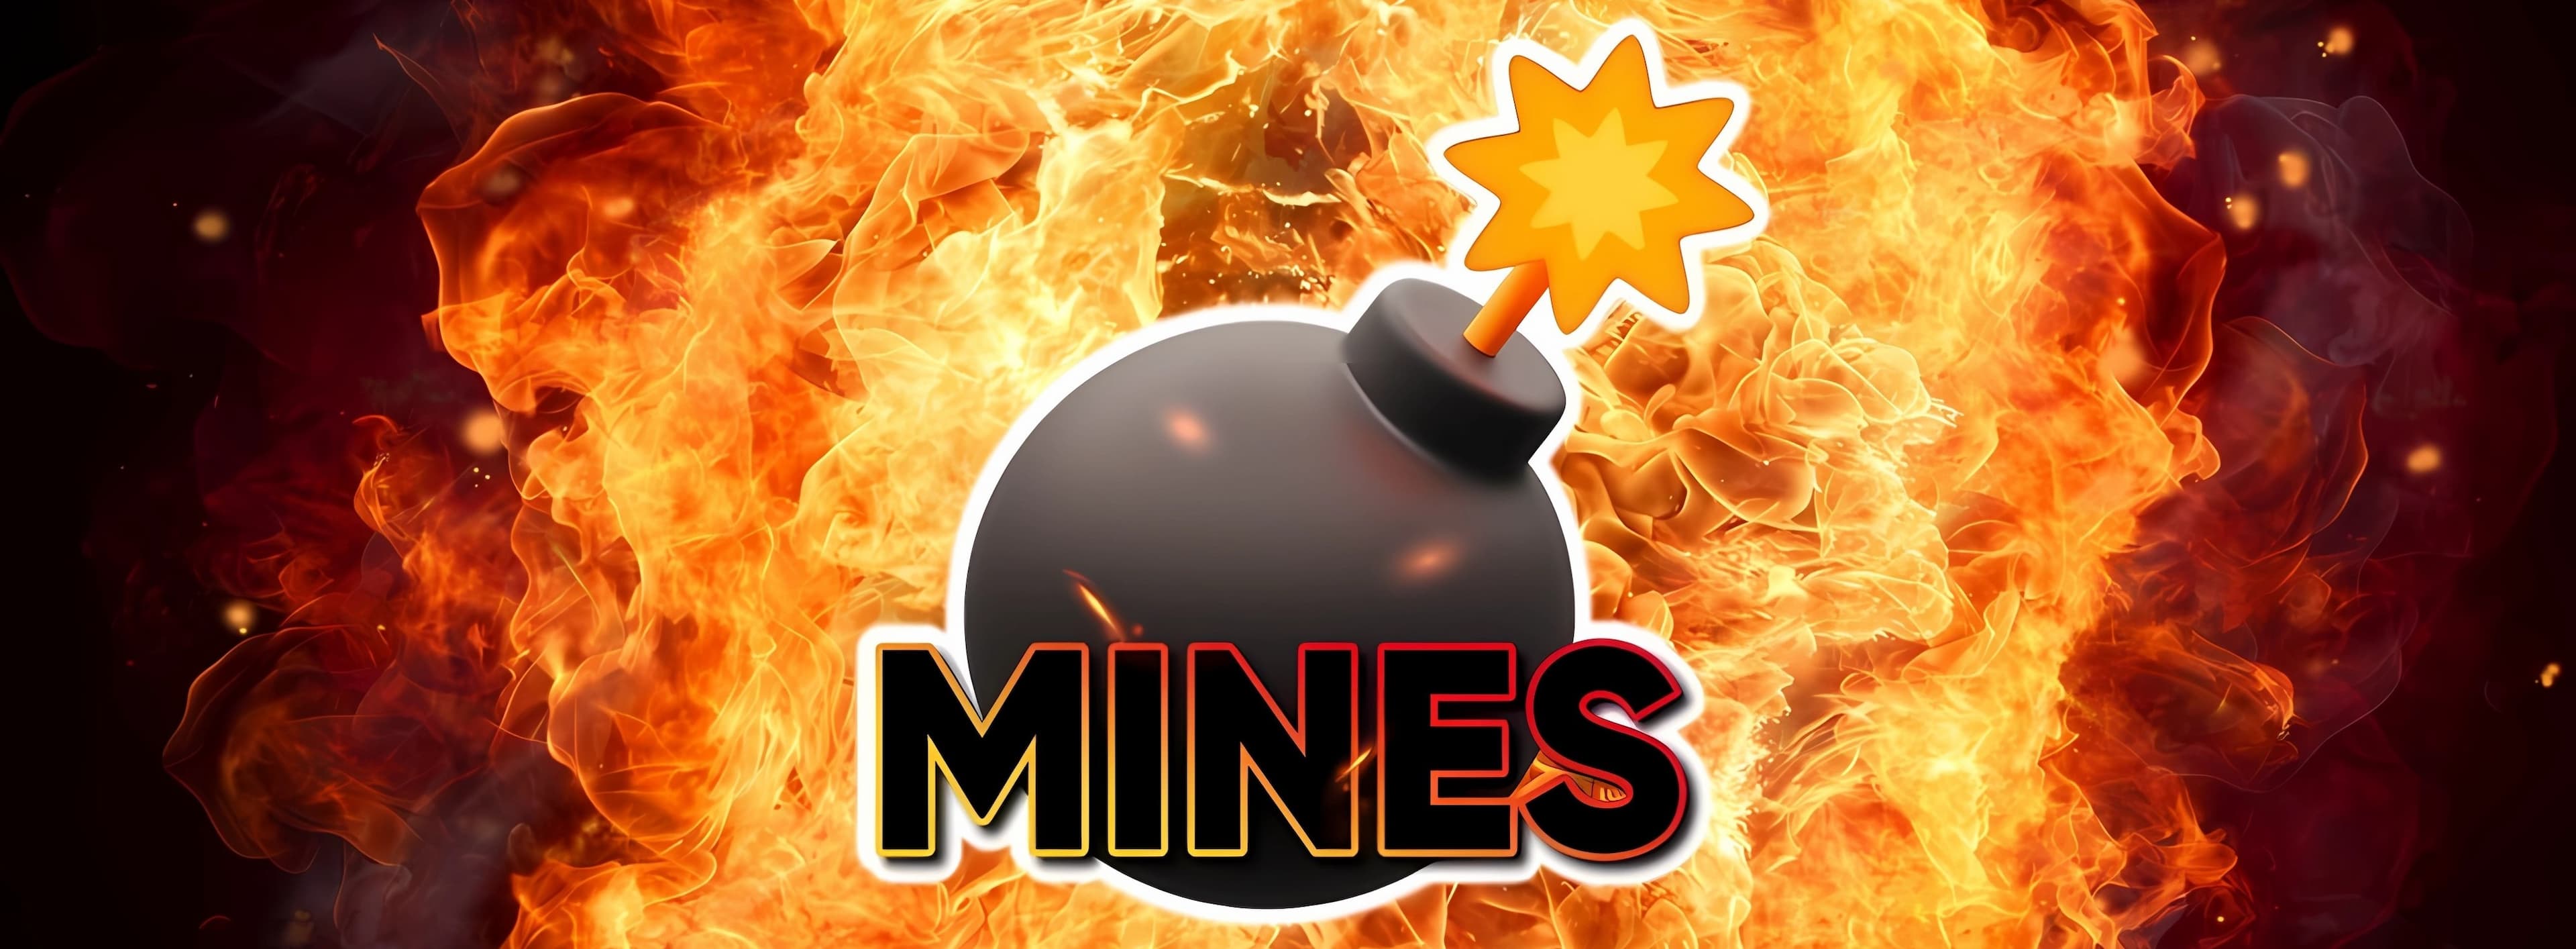 Mines cover